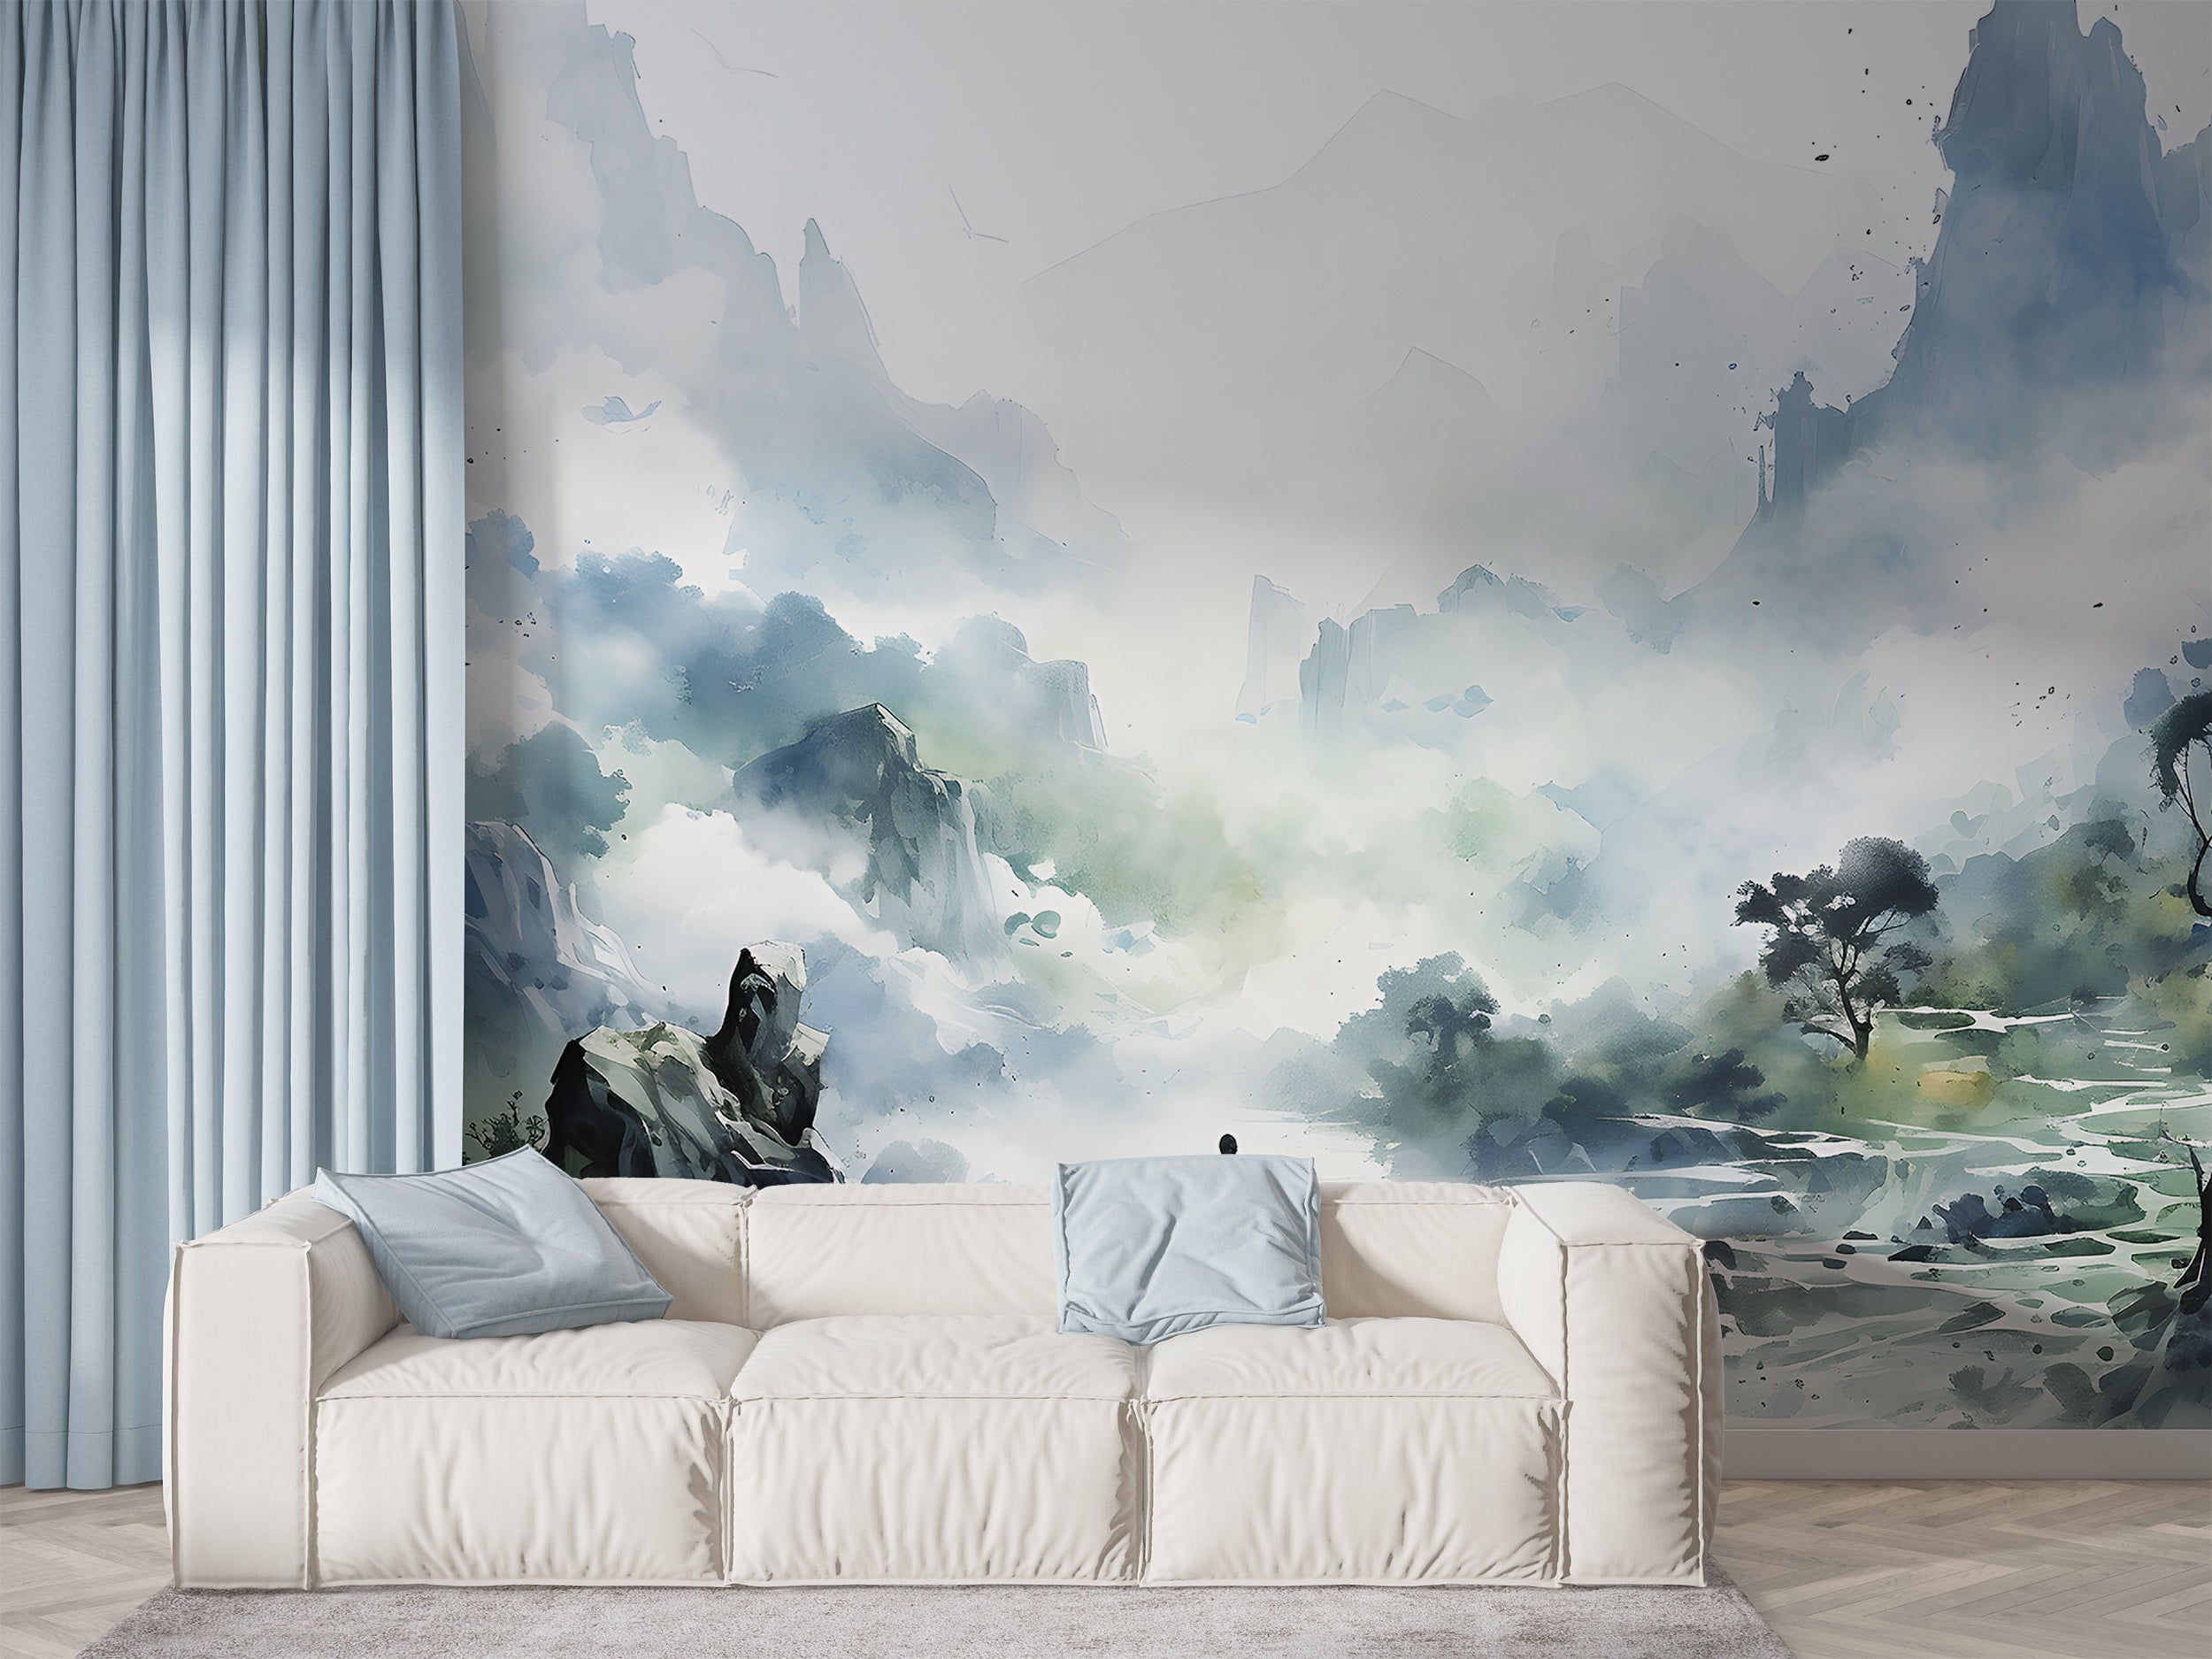 Elevate Your Space with Samurai-Inspired Mural